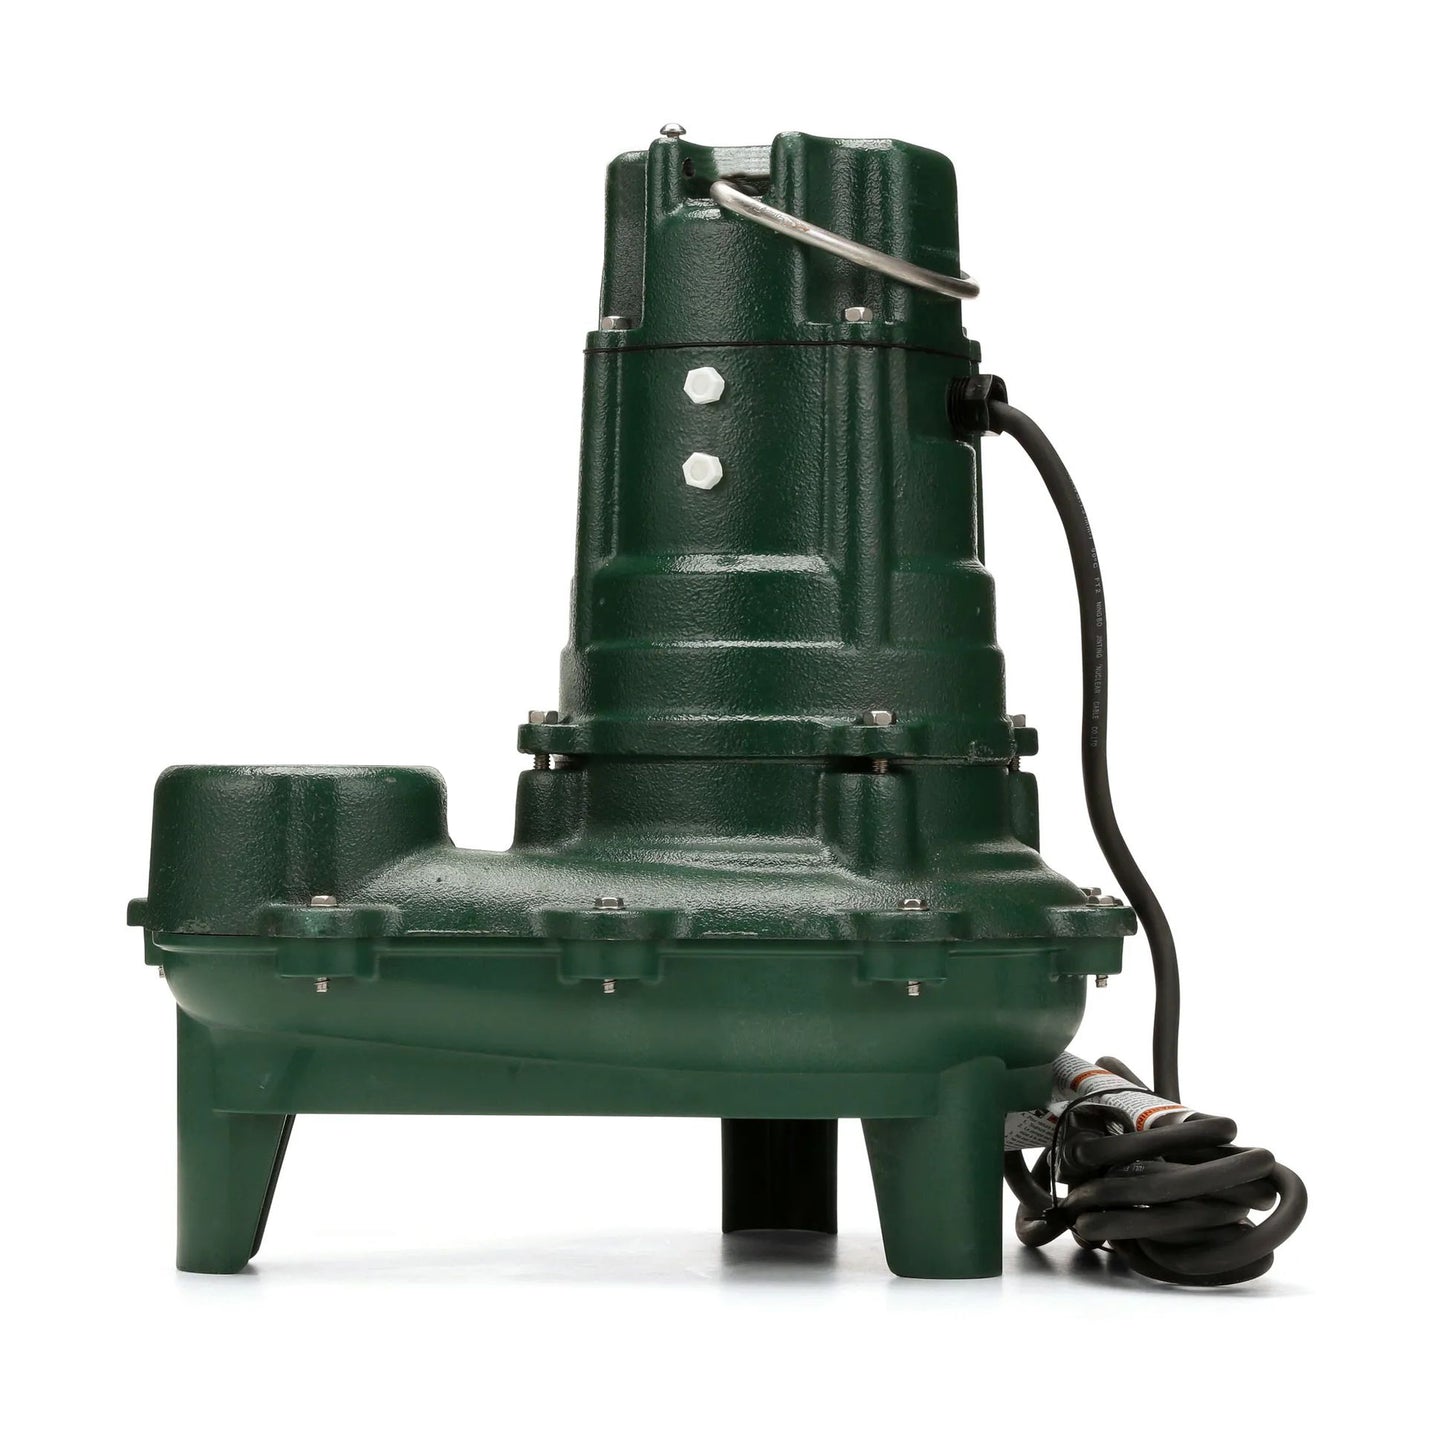 267-0002 - N267 Waste-Mate Non-Automatic Cast Iron Sewage Pump, 115V, 1/2 HP